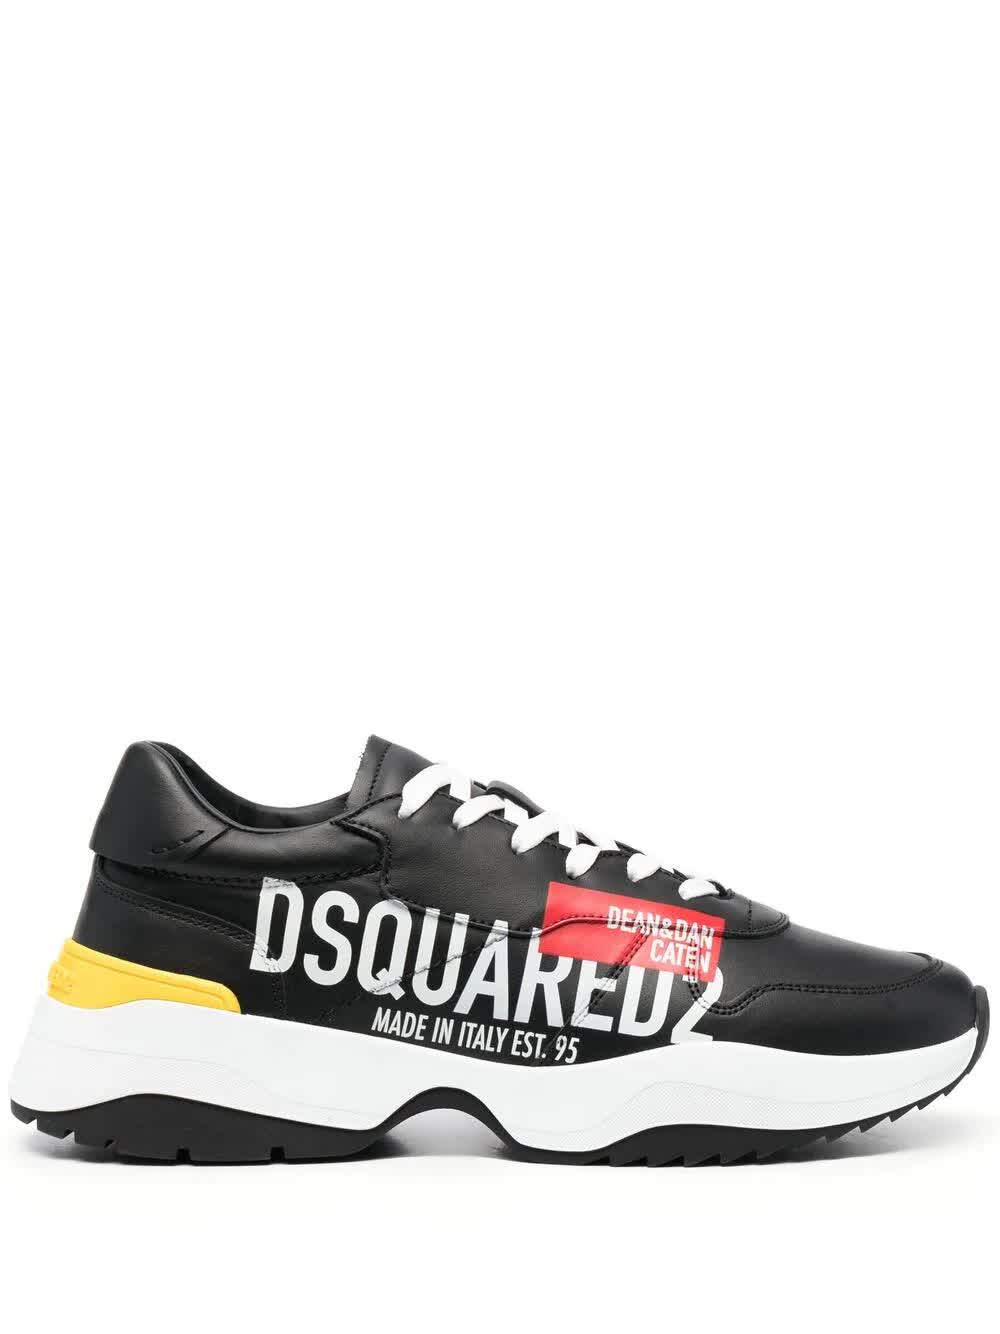 Man Black Made In Italy Dsquared2 D24 Sneakers